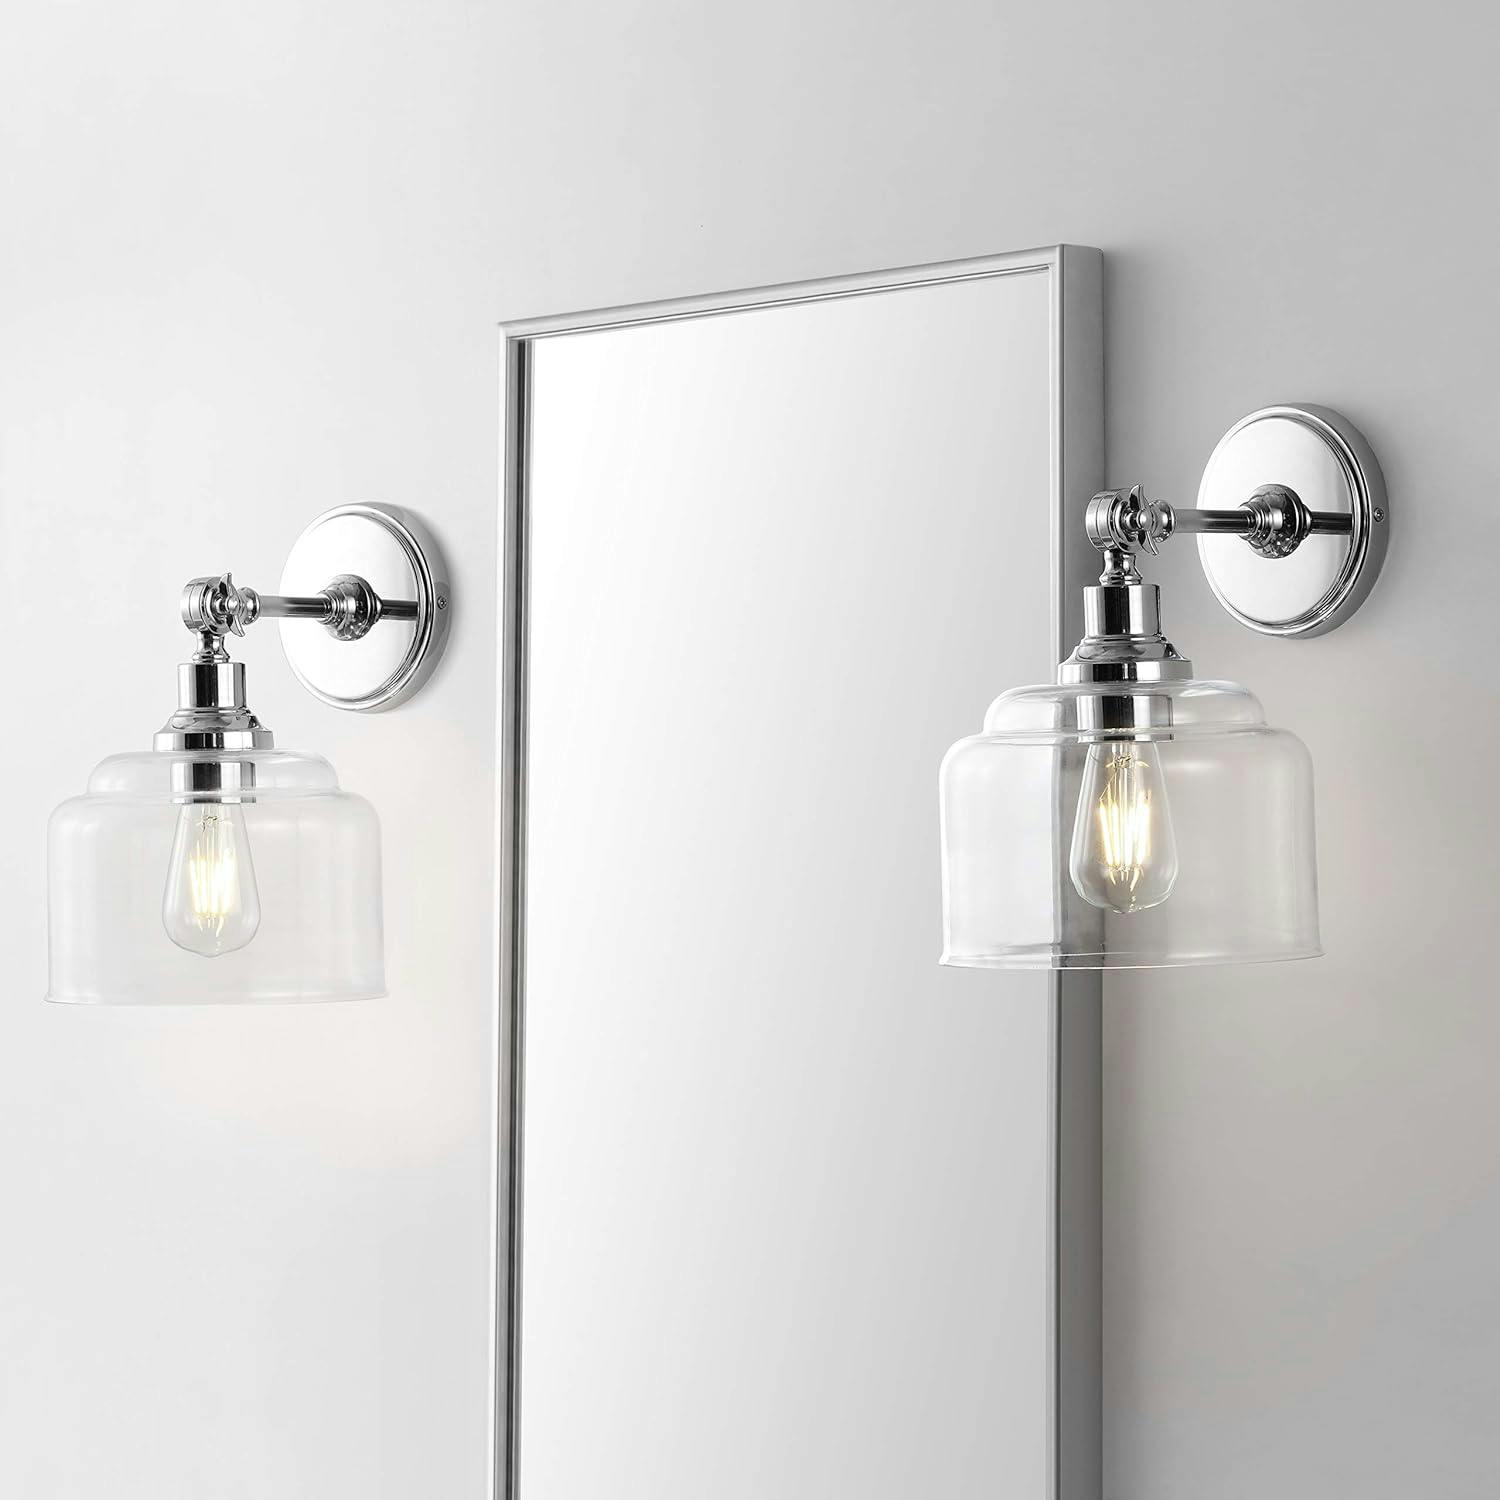 Lansor Chrome Glass Artistic Flow Wall Sconce Set of 2